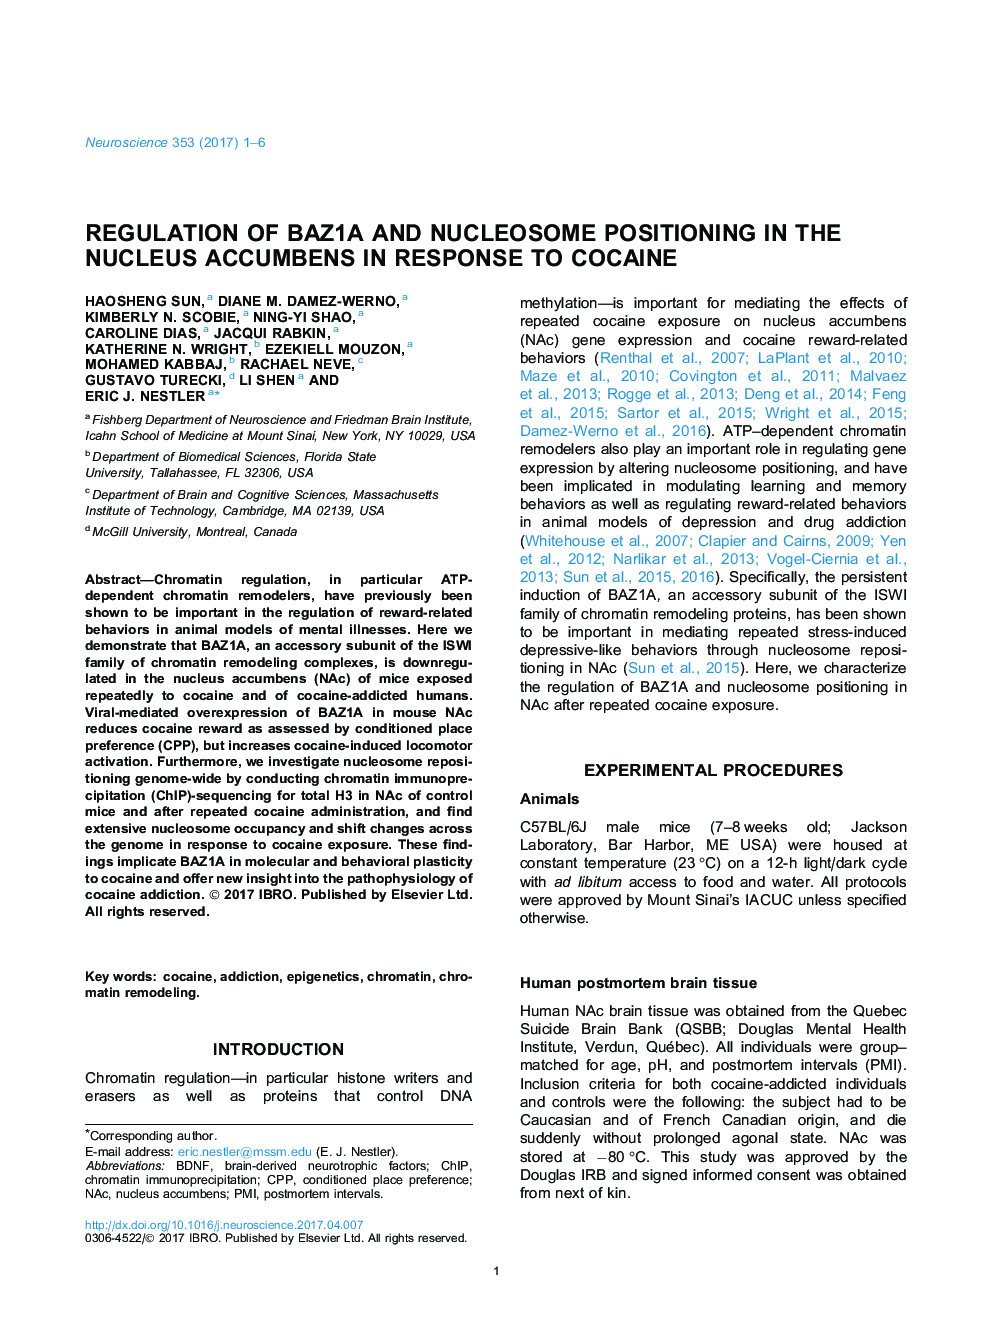 Regulation of BAZ1A and nucleosome positioning in the nucleus accumbens in response to cocaine